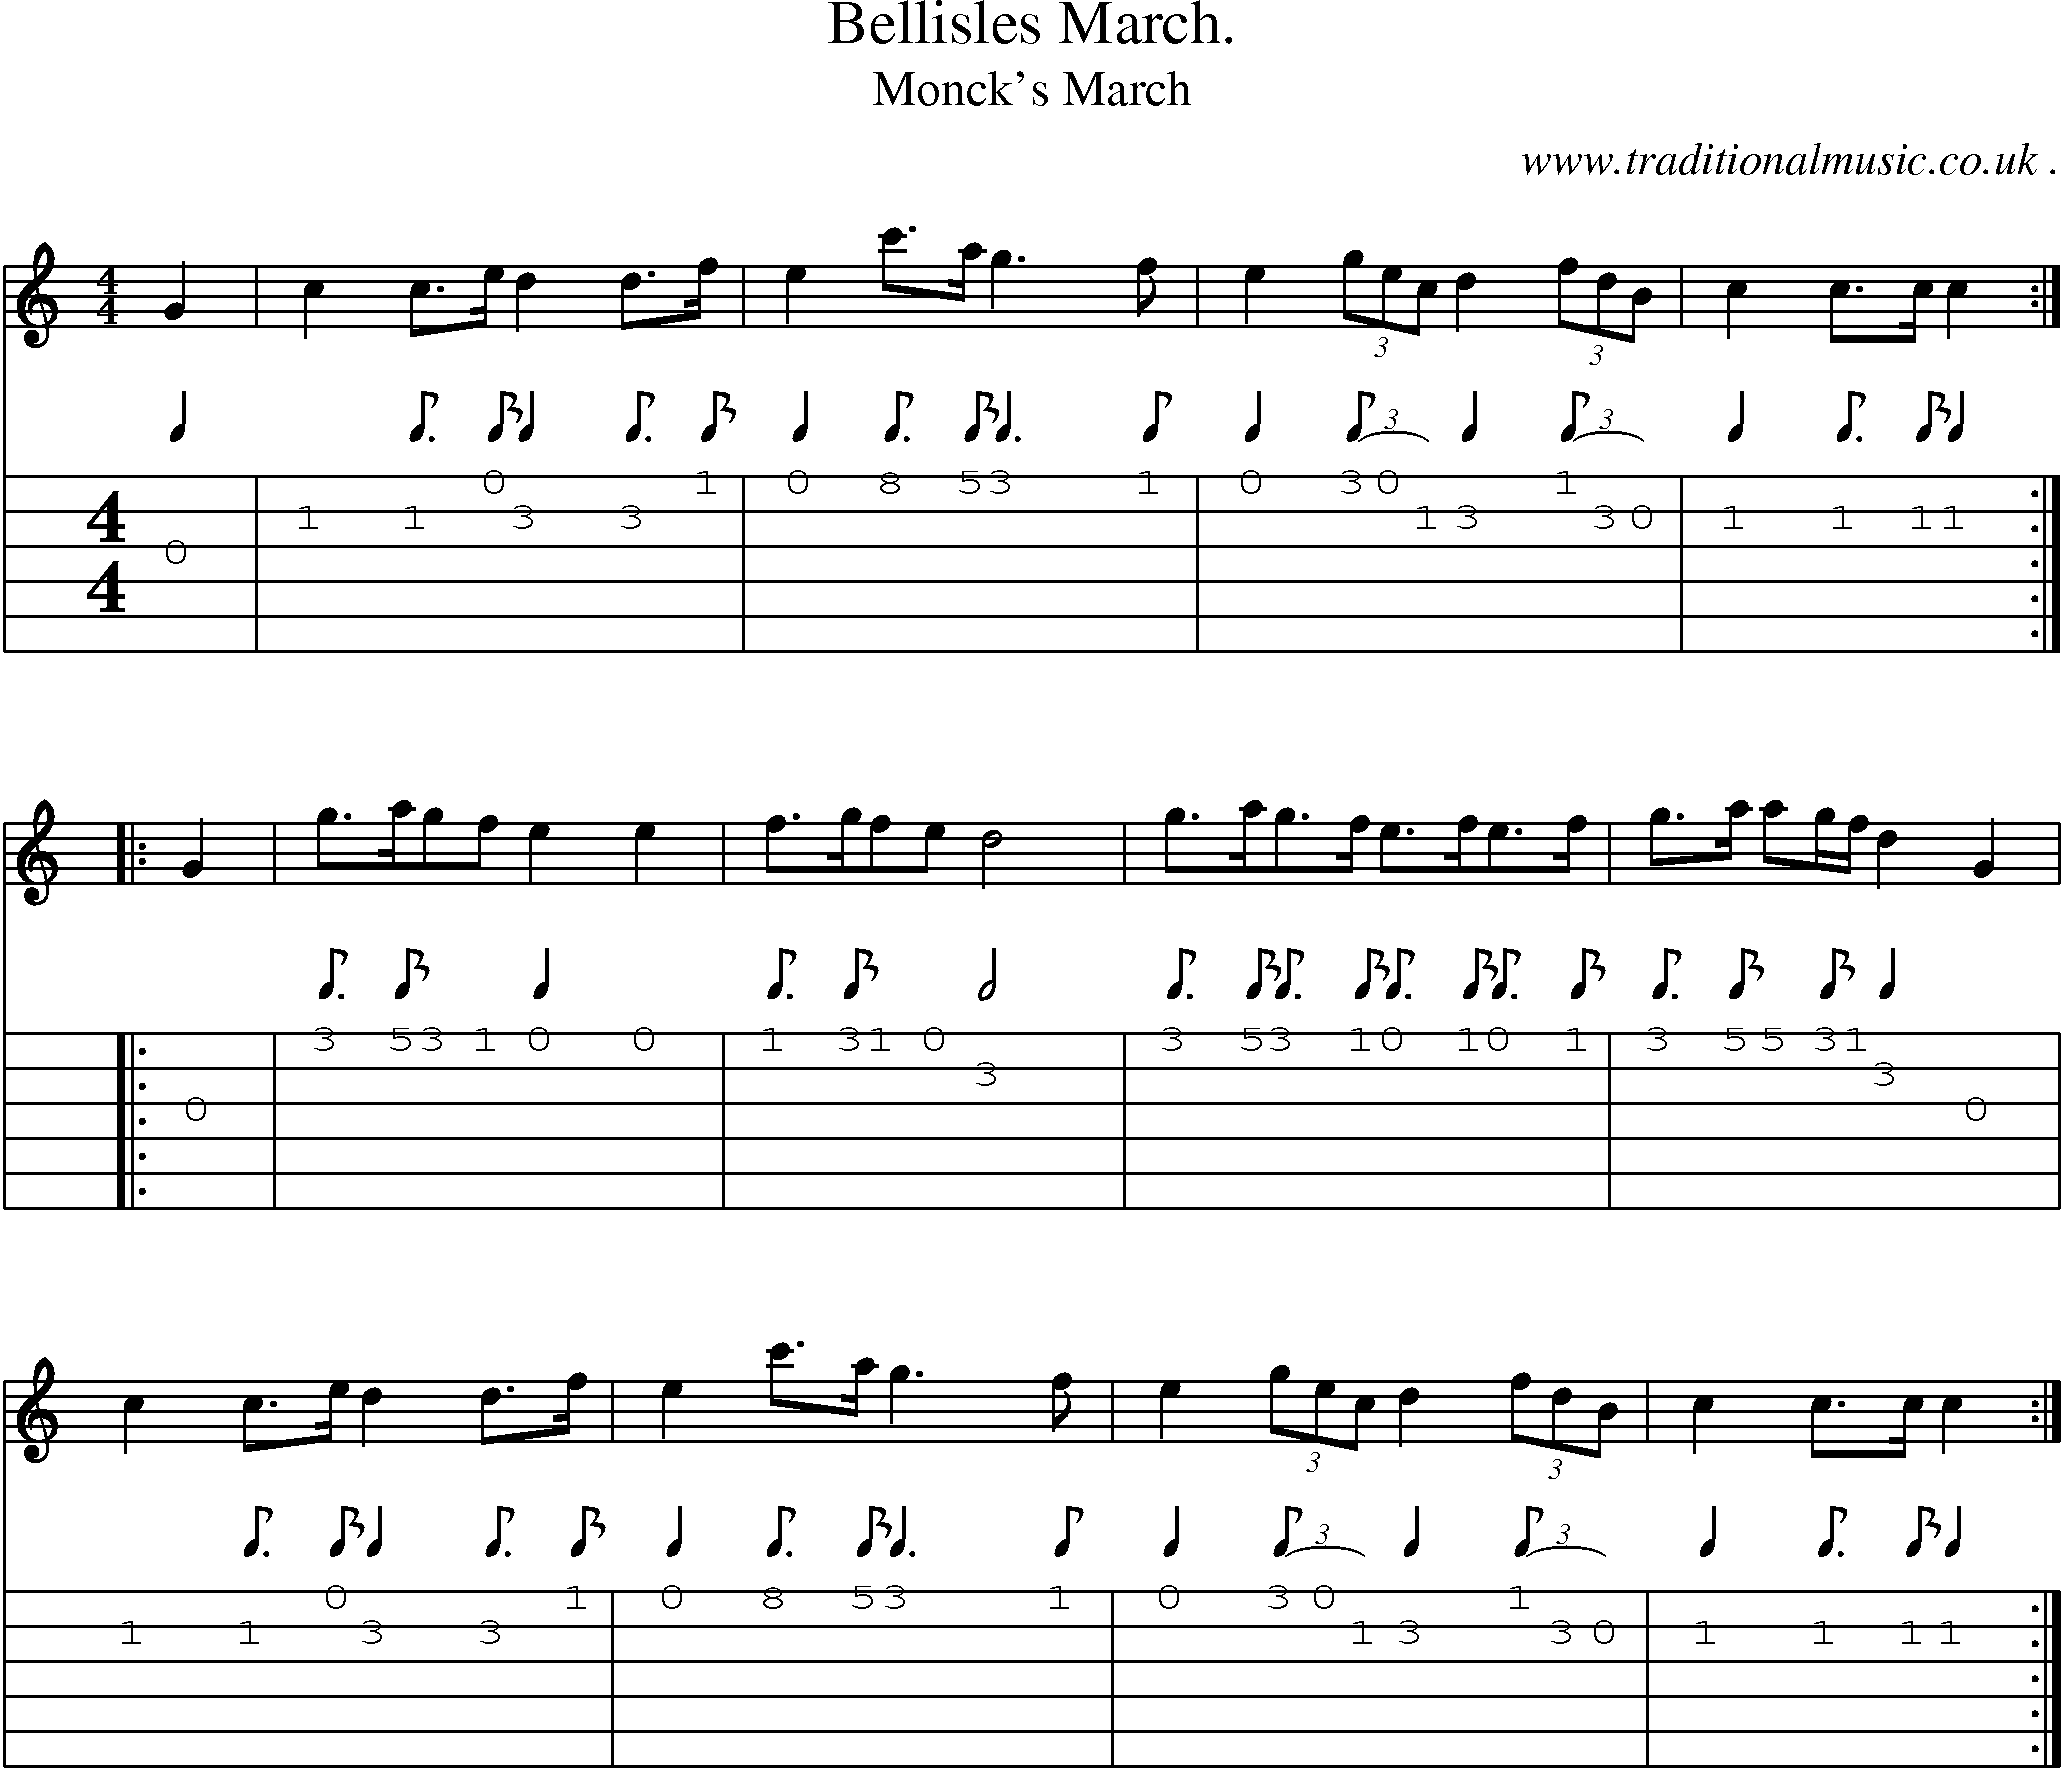 Sheet-Music and Guitar Tabs for Bellisles March